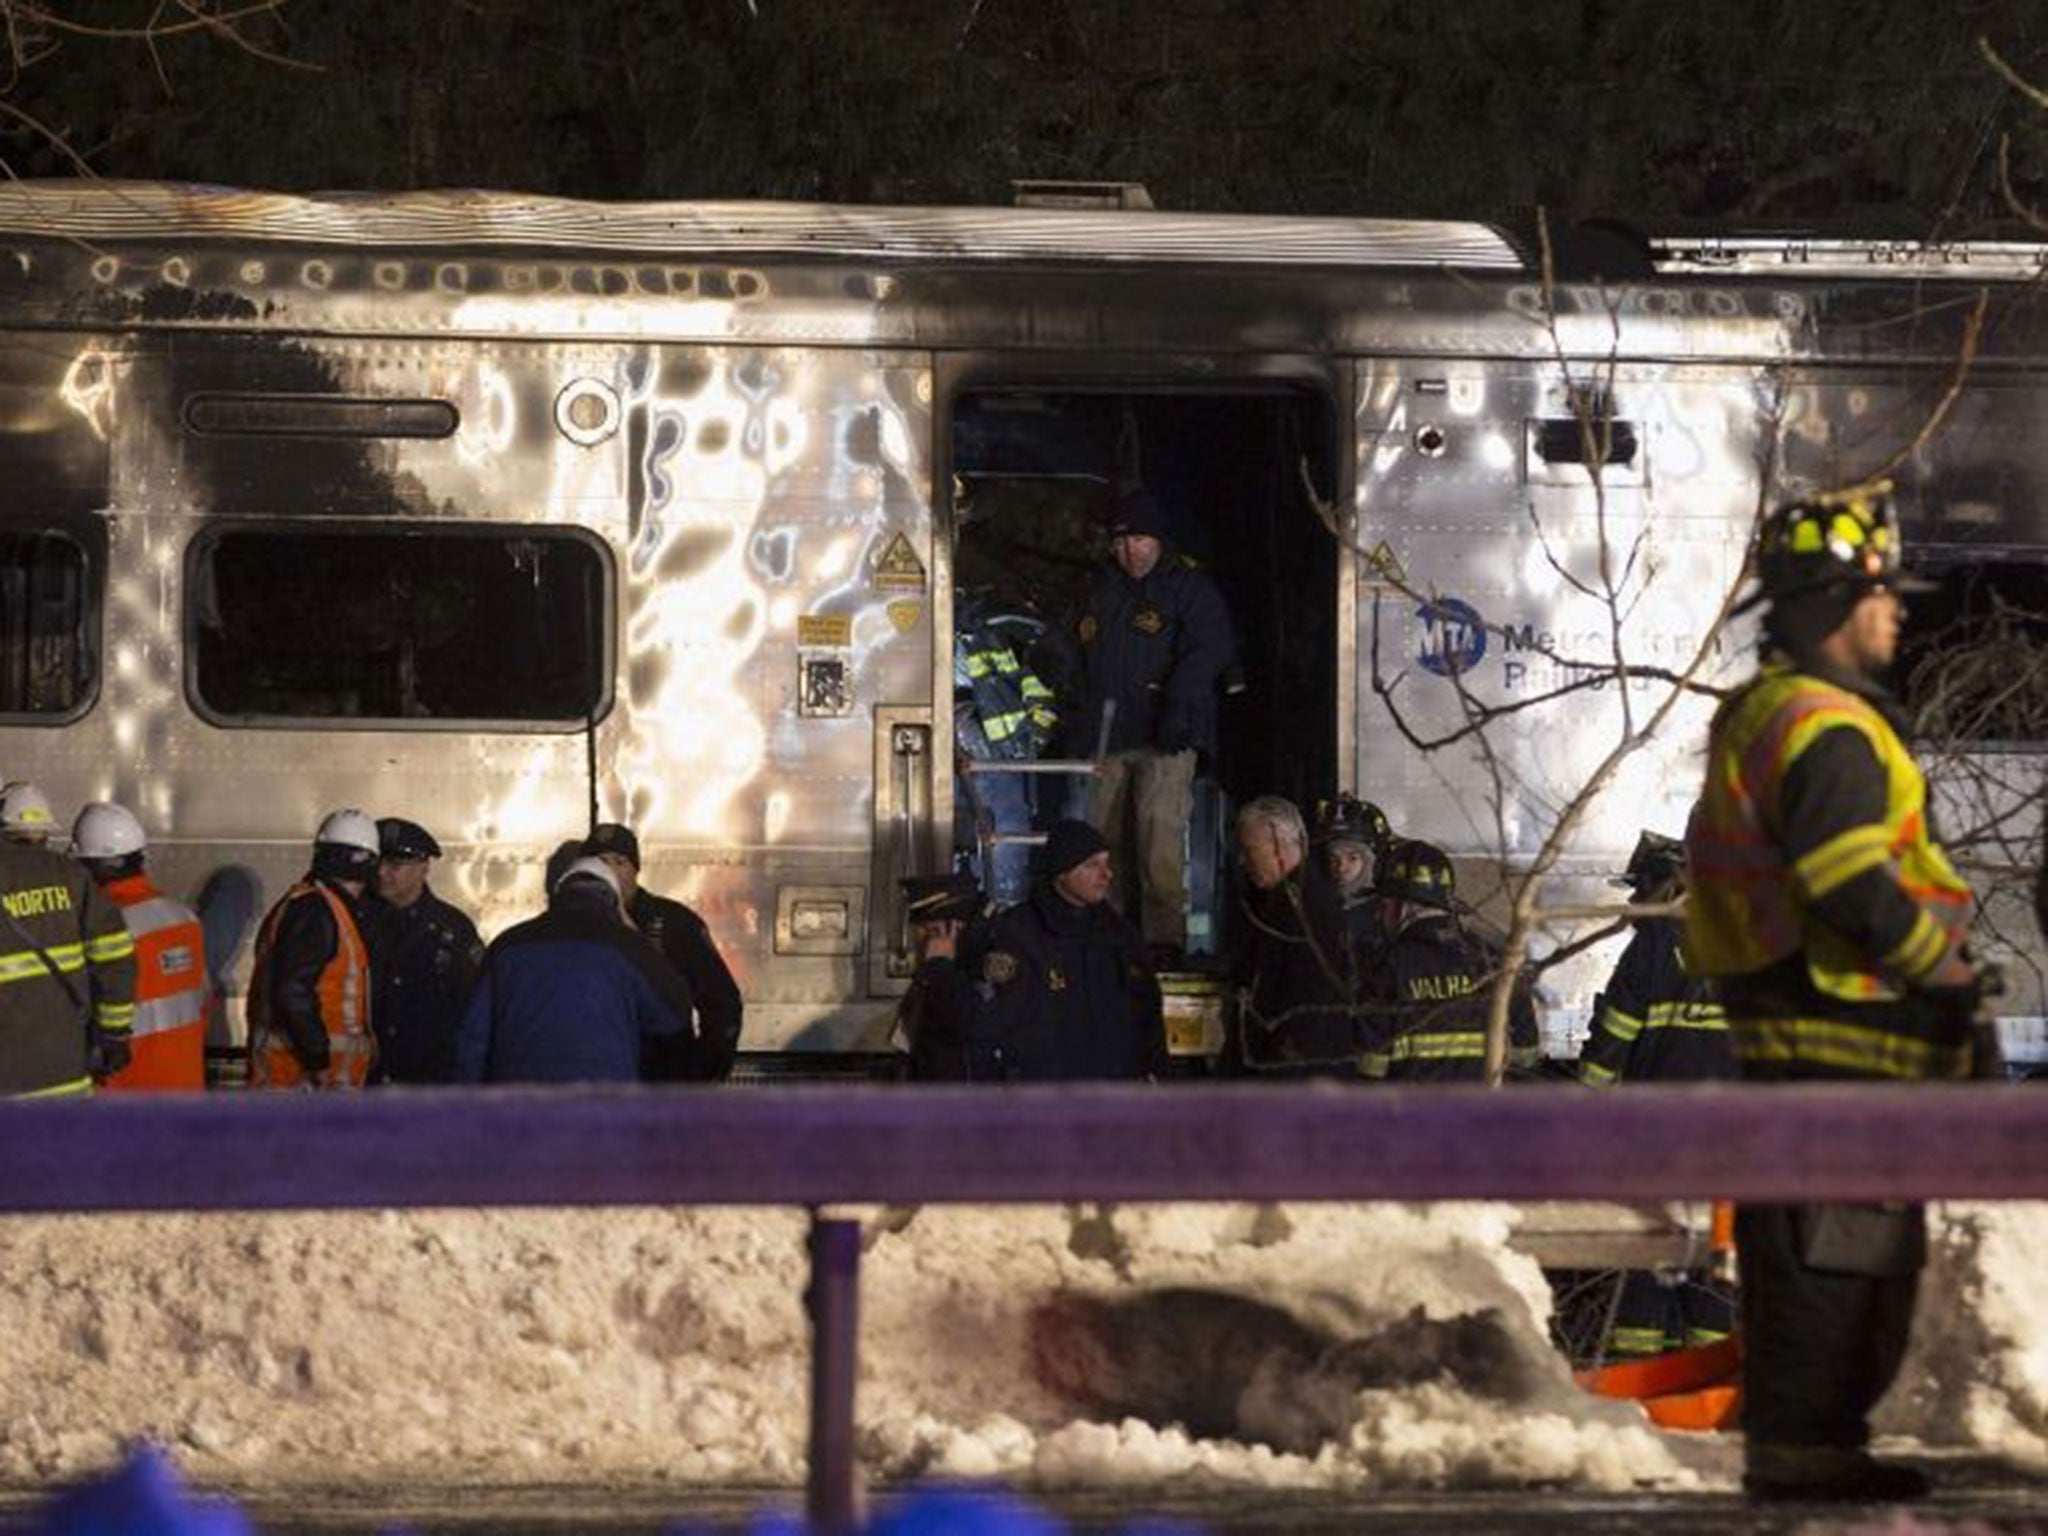 Emergency workers stand in and around a burnt Metropolitan Transportation Authority (MTA) Metro North Railroad commuter train near the town of Valhalla, New York